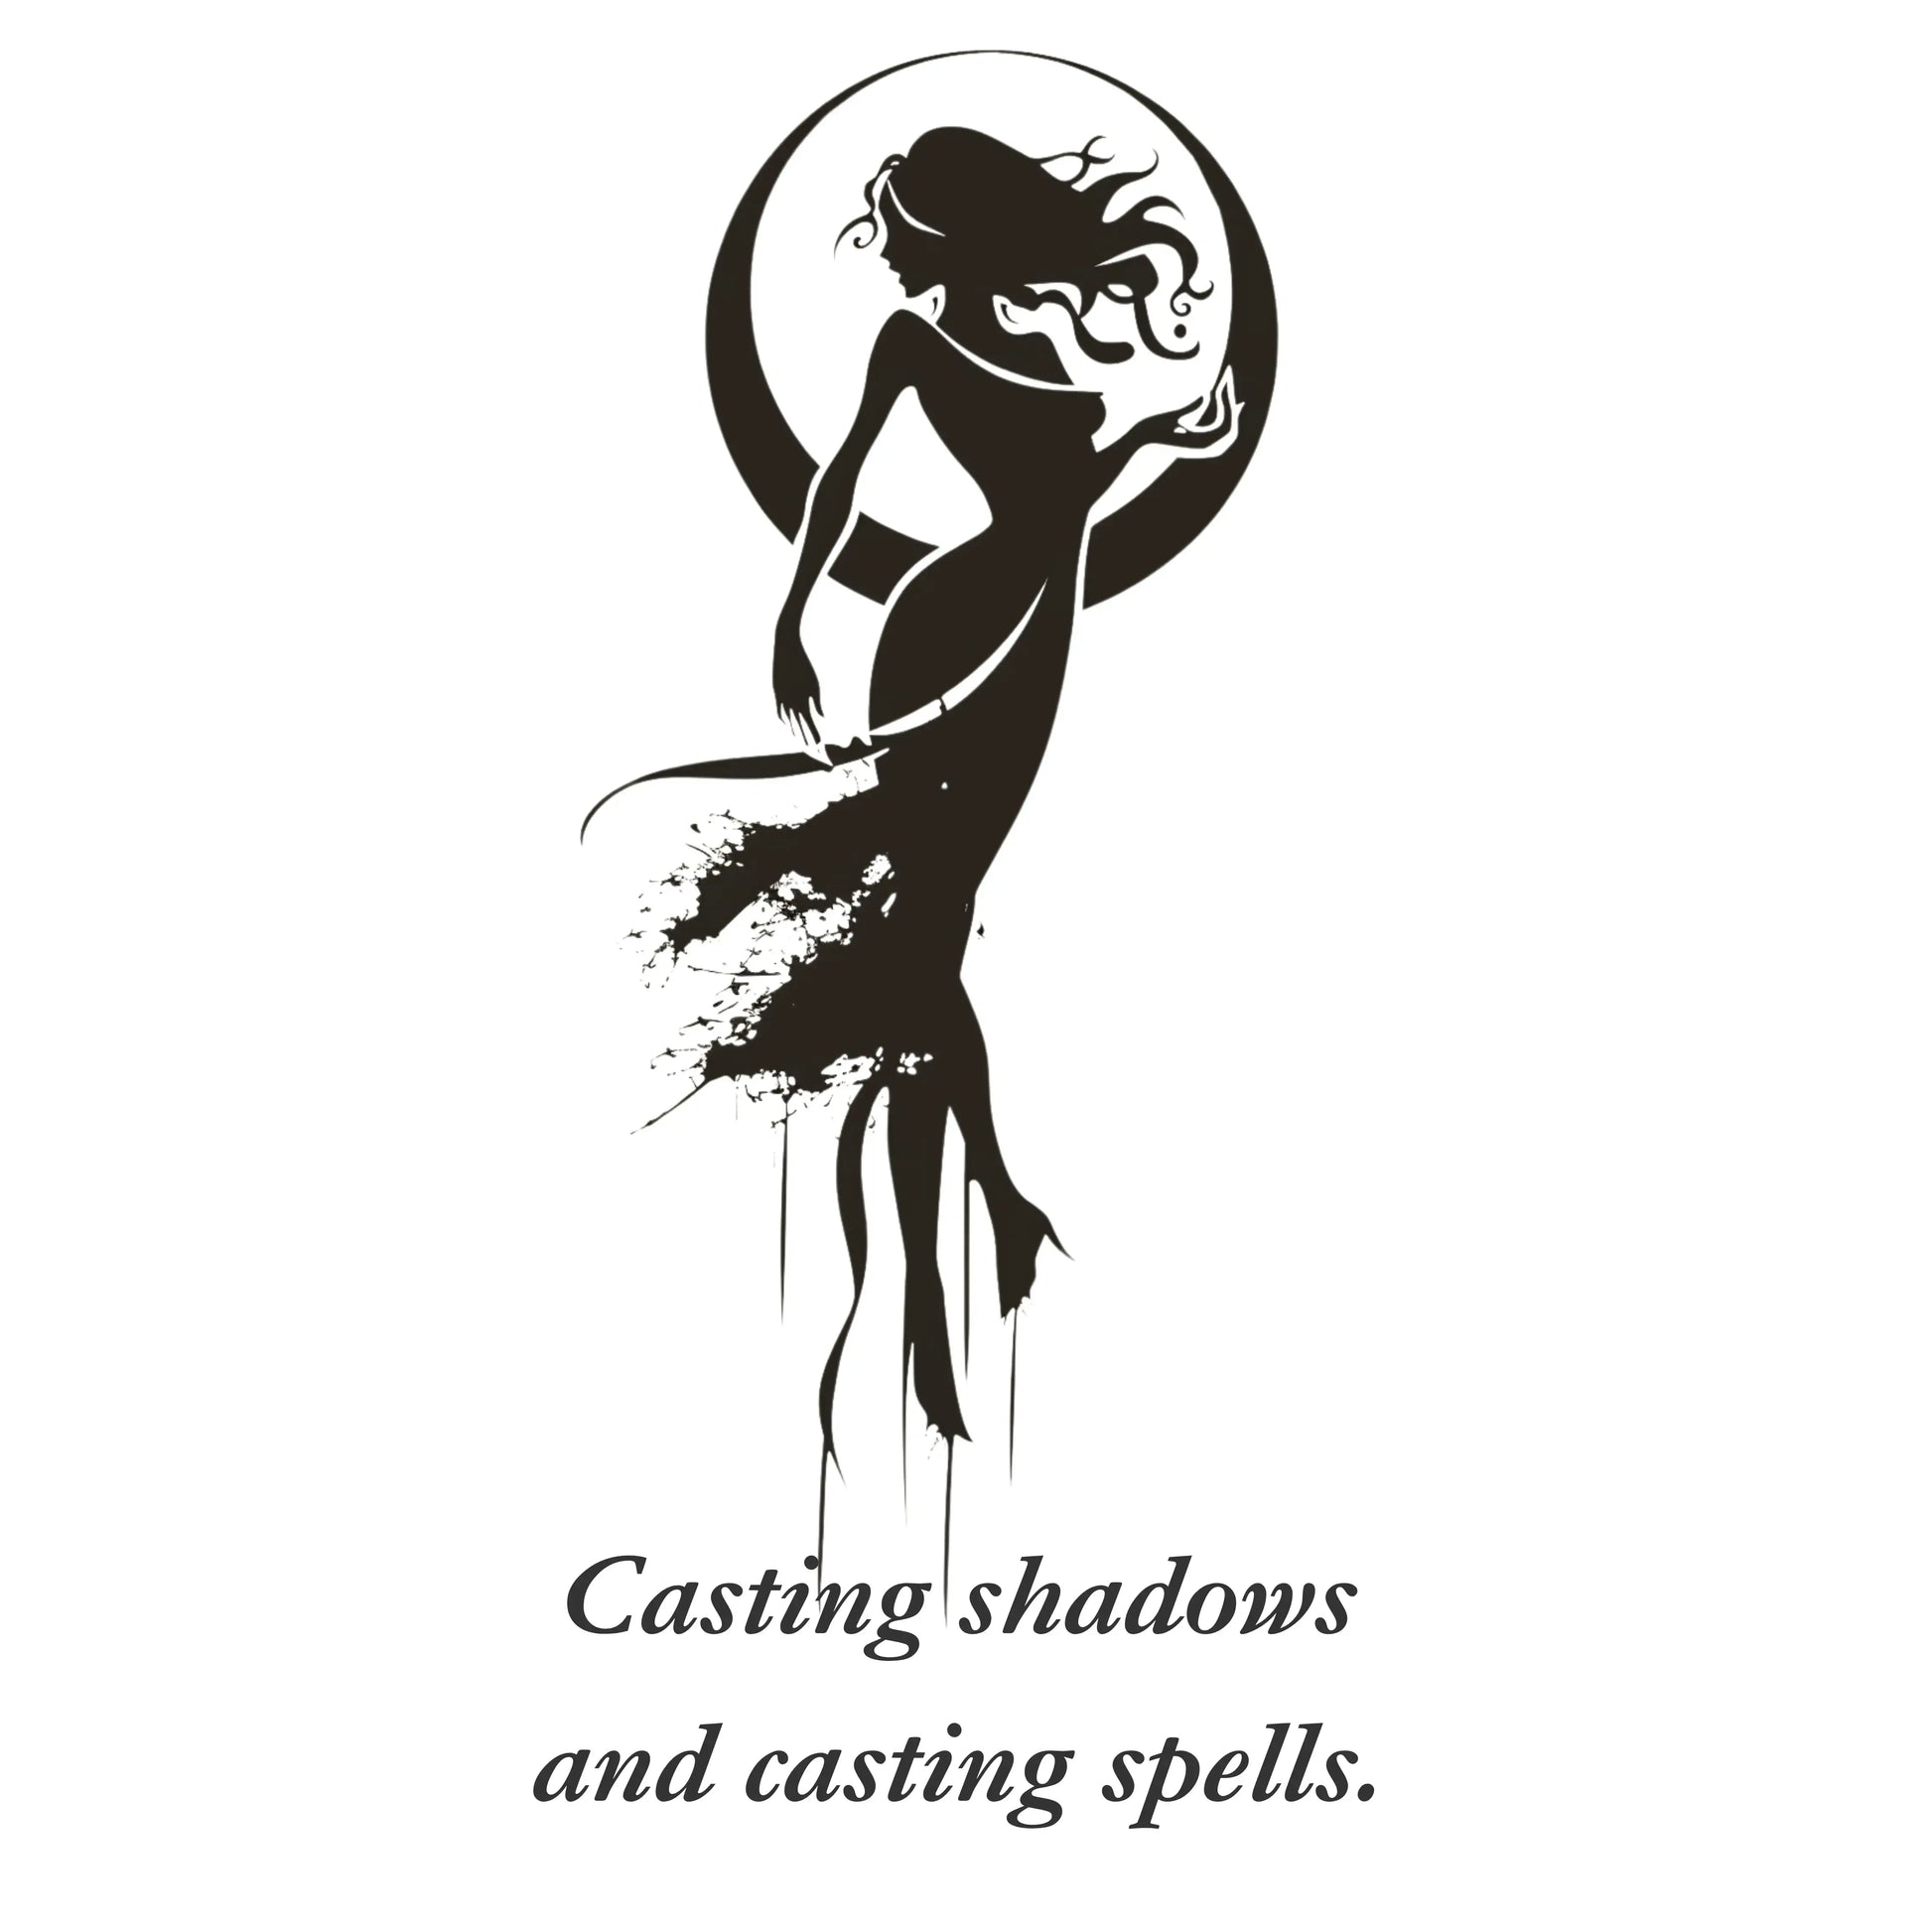 Casting shadows and casting spells graphic design from blk moon shop.